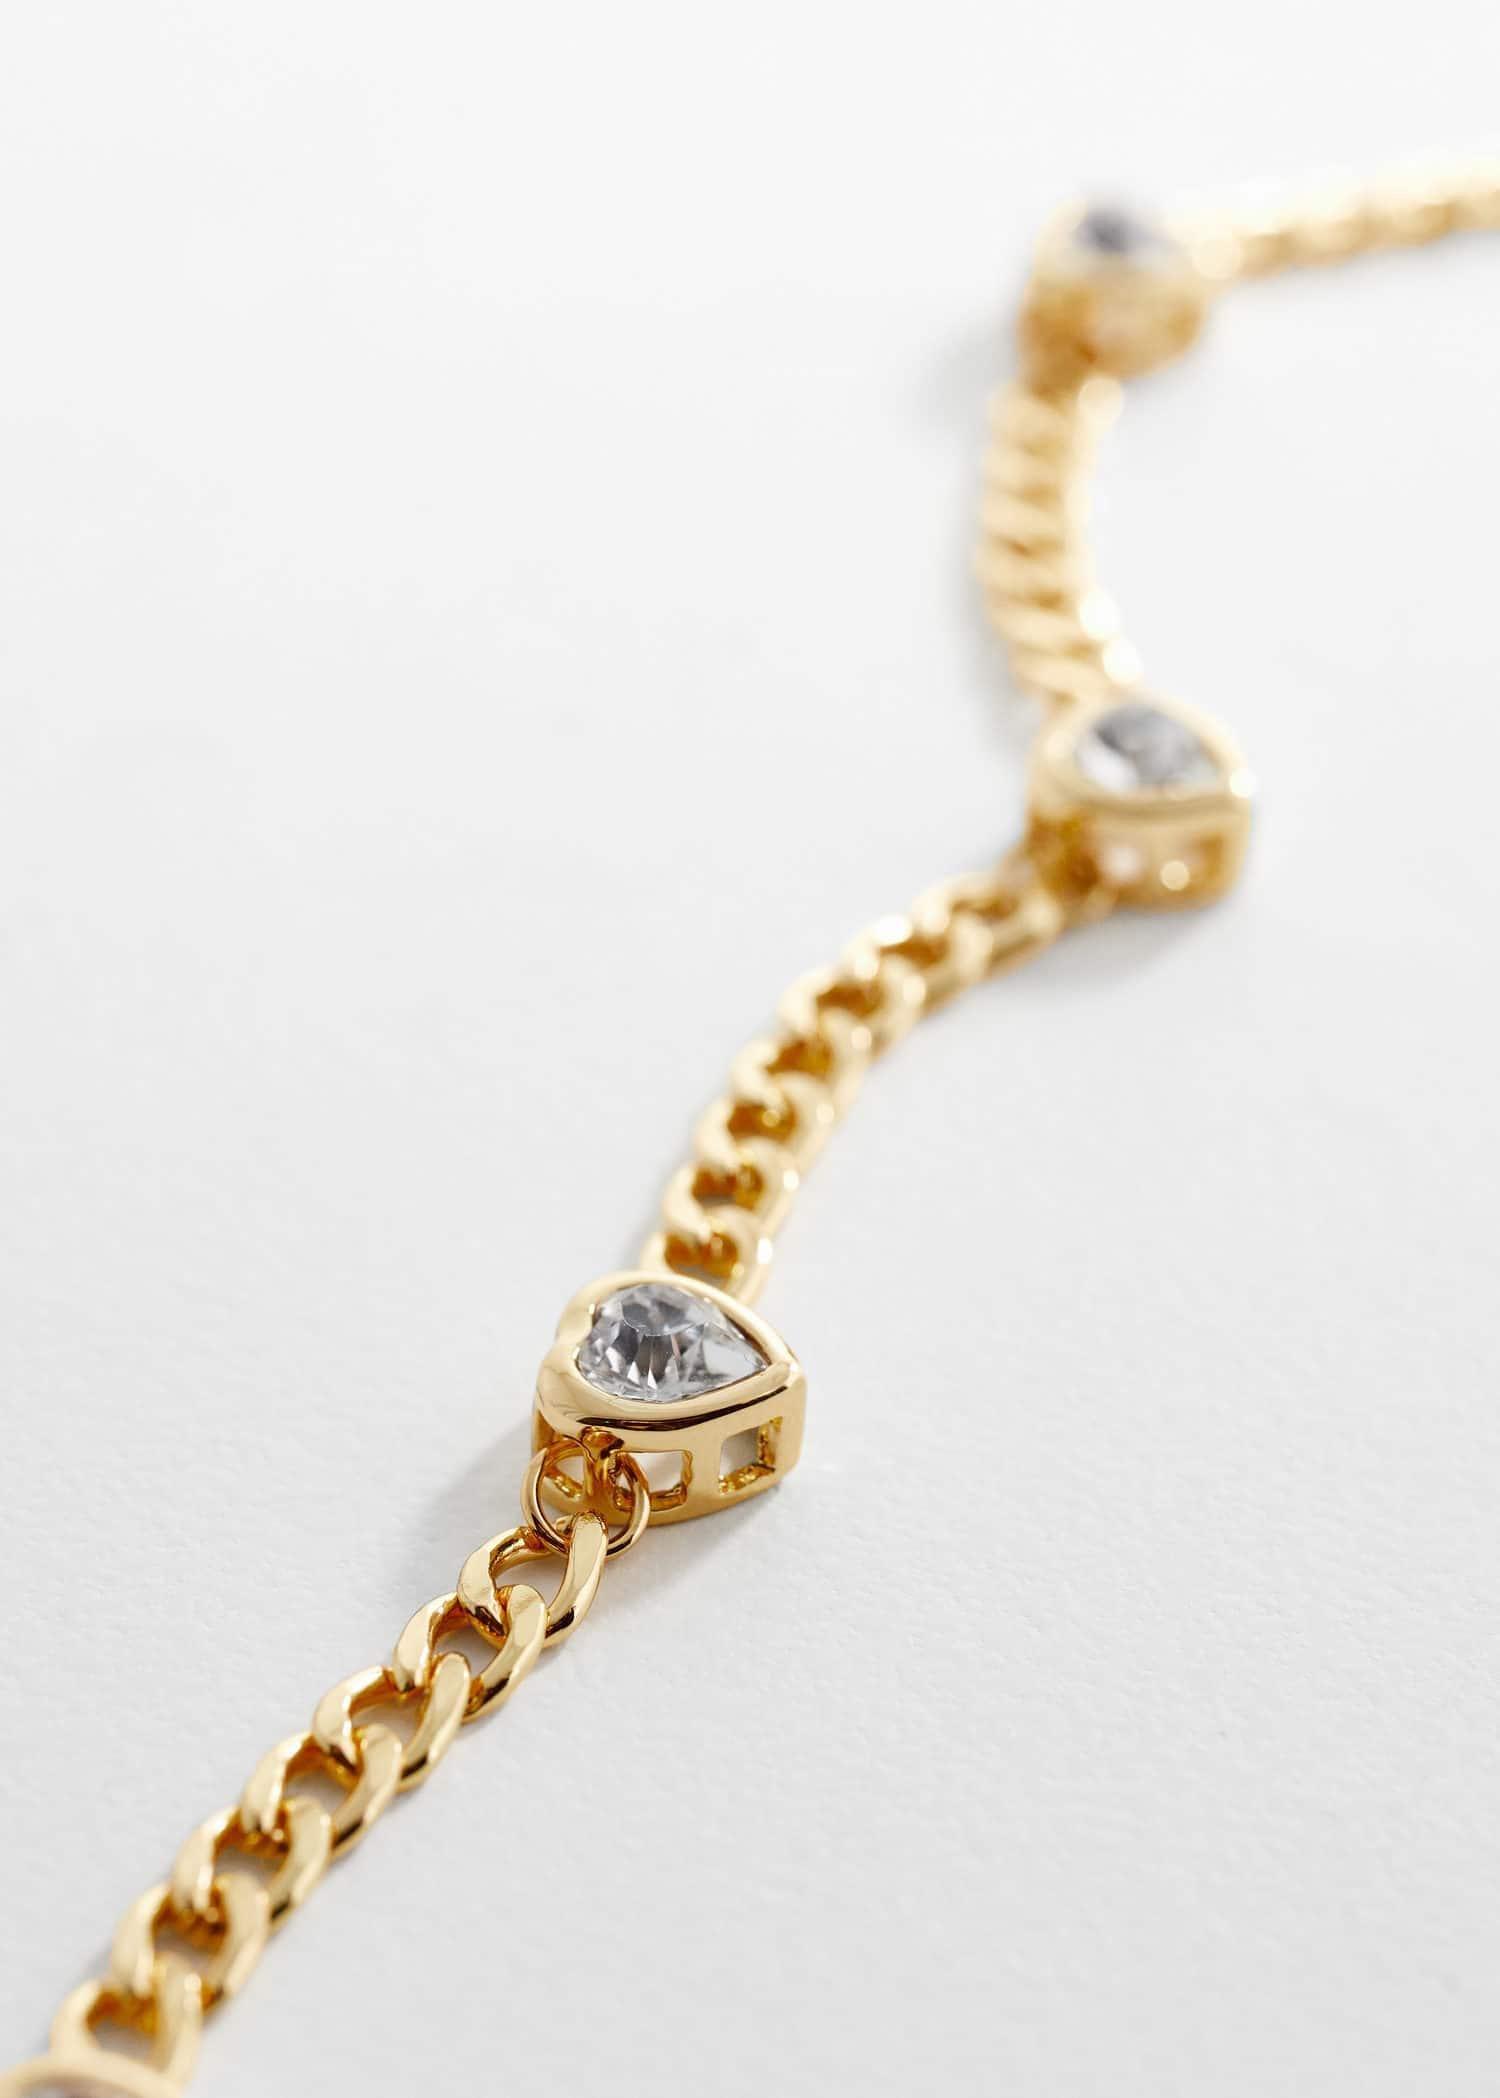 Mango - Gold Crystal Chain Necklace